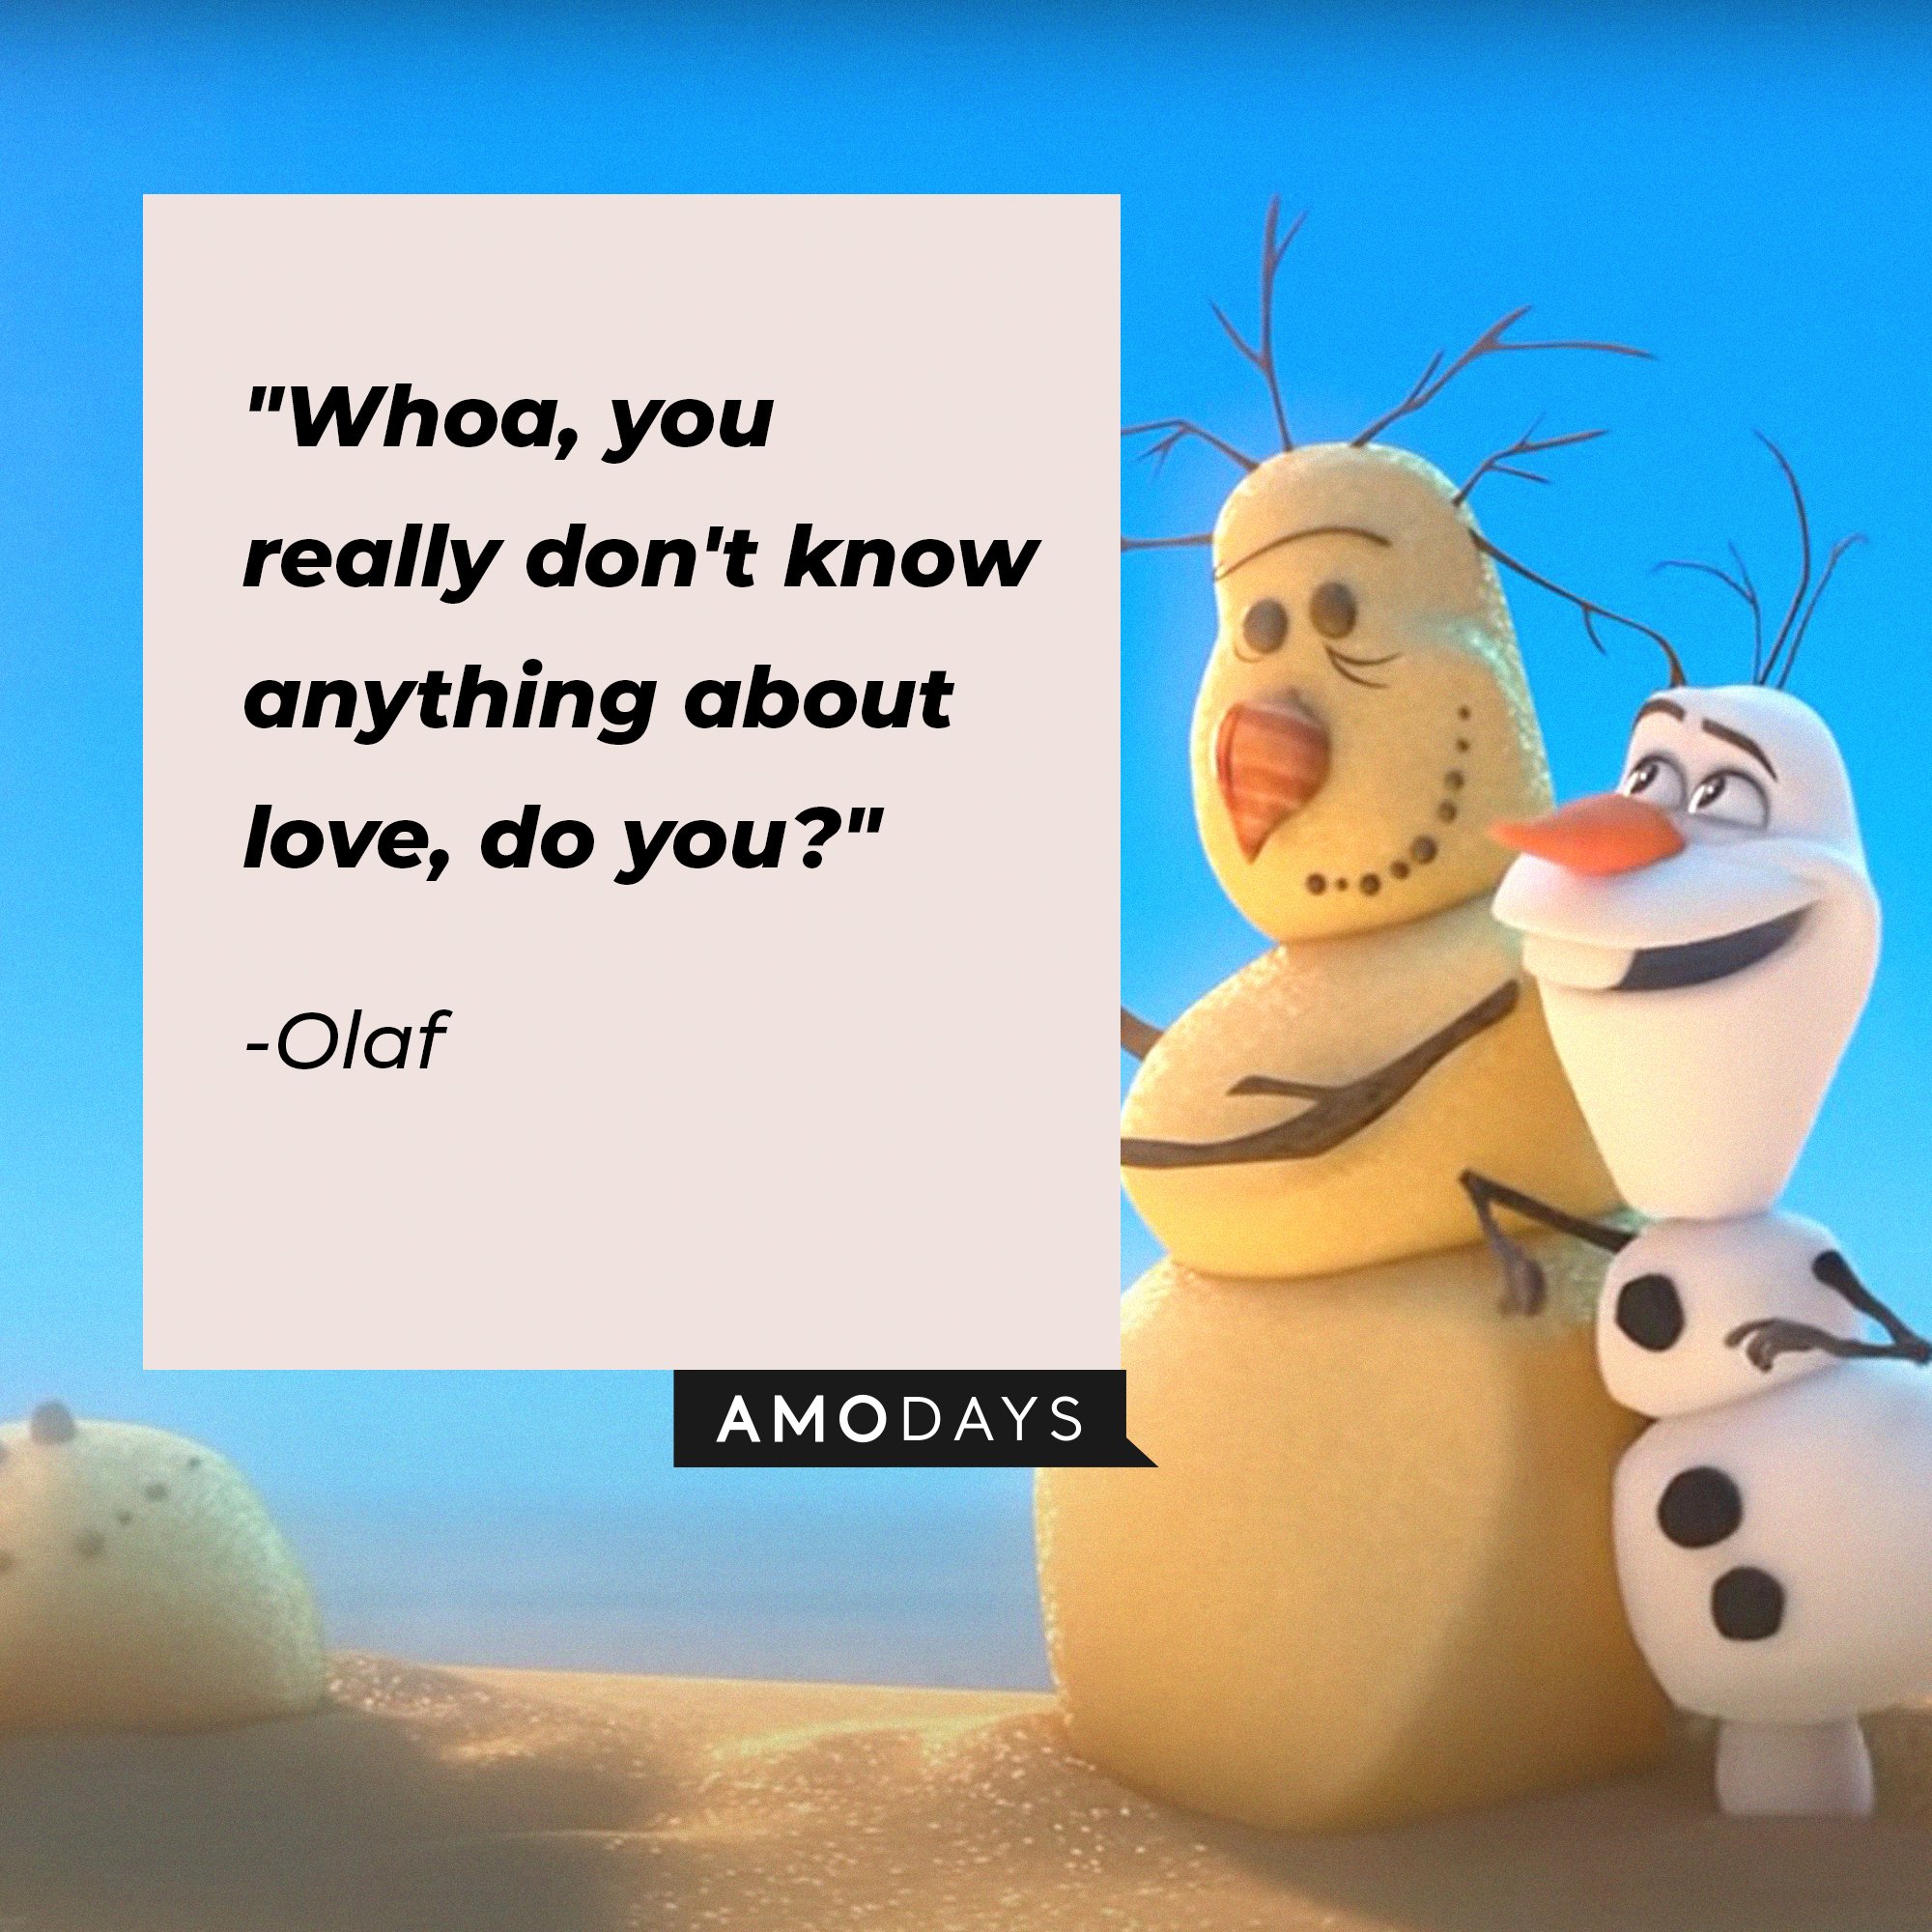 Olaf’s quote: "Whoa, you really don't know anything about love, do you?" | Image: AmoDays  